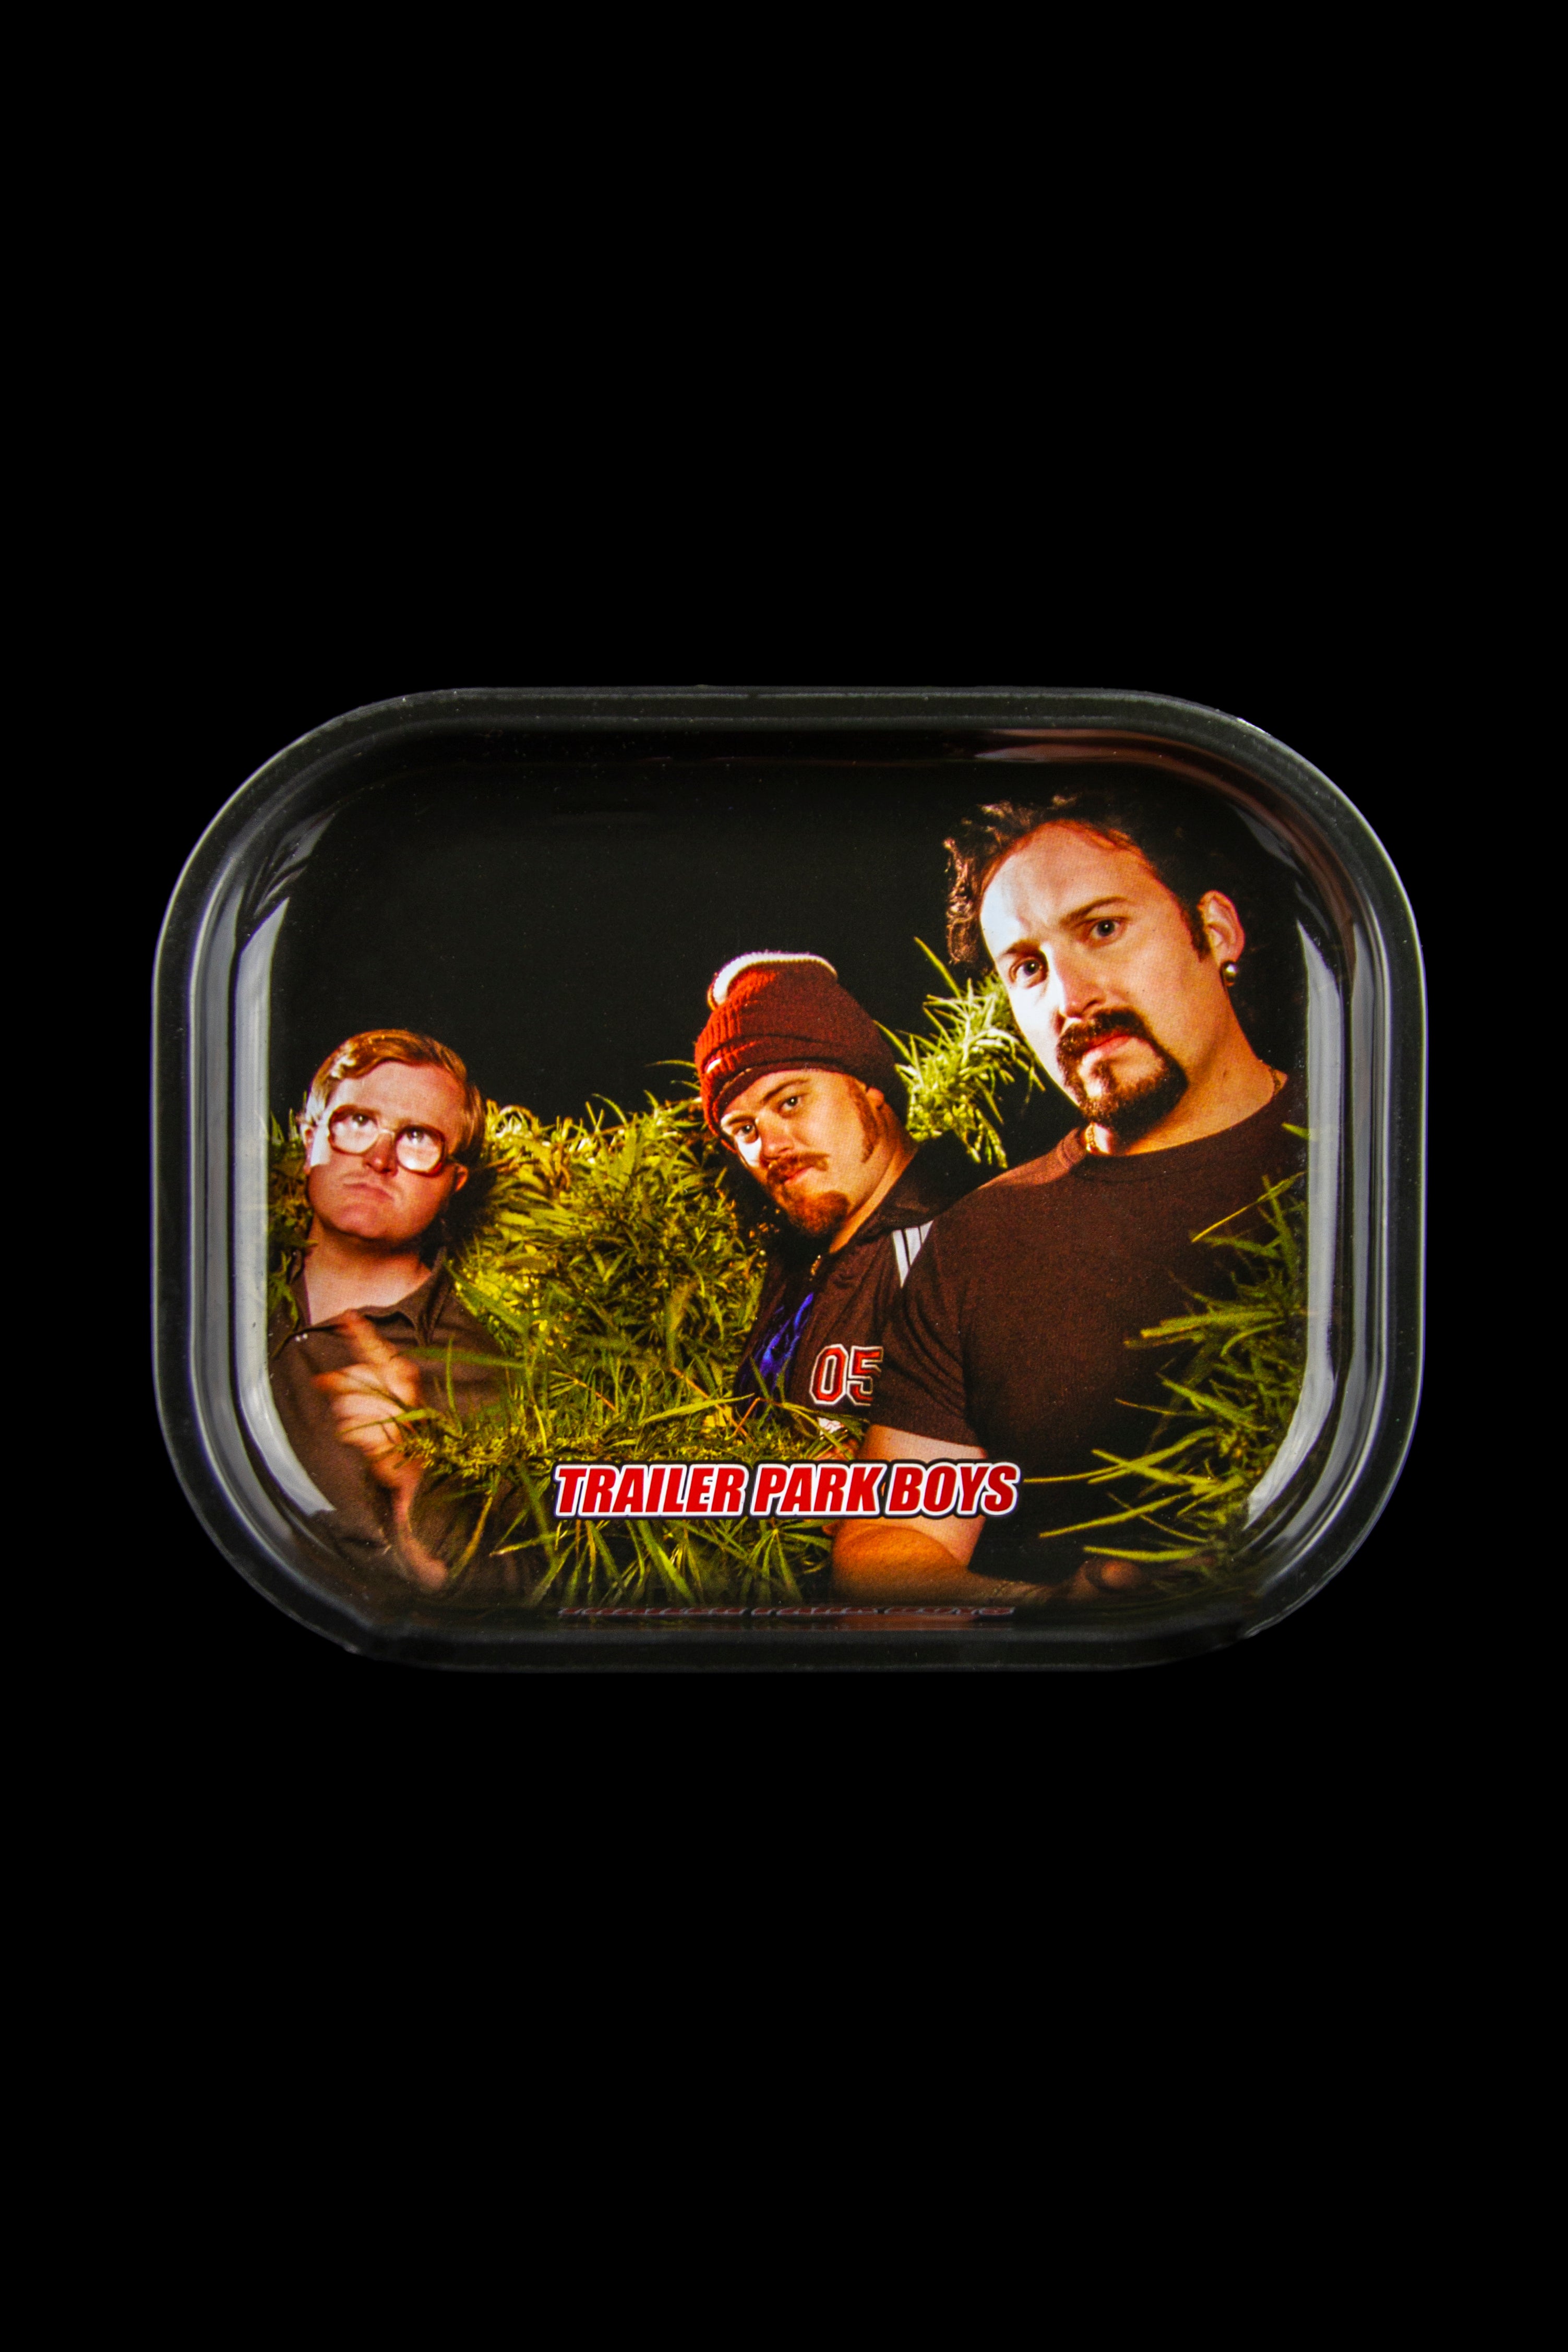 Image of Trailer Park Boys "Clippings" Rolling Tray